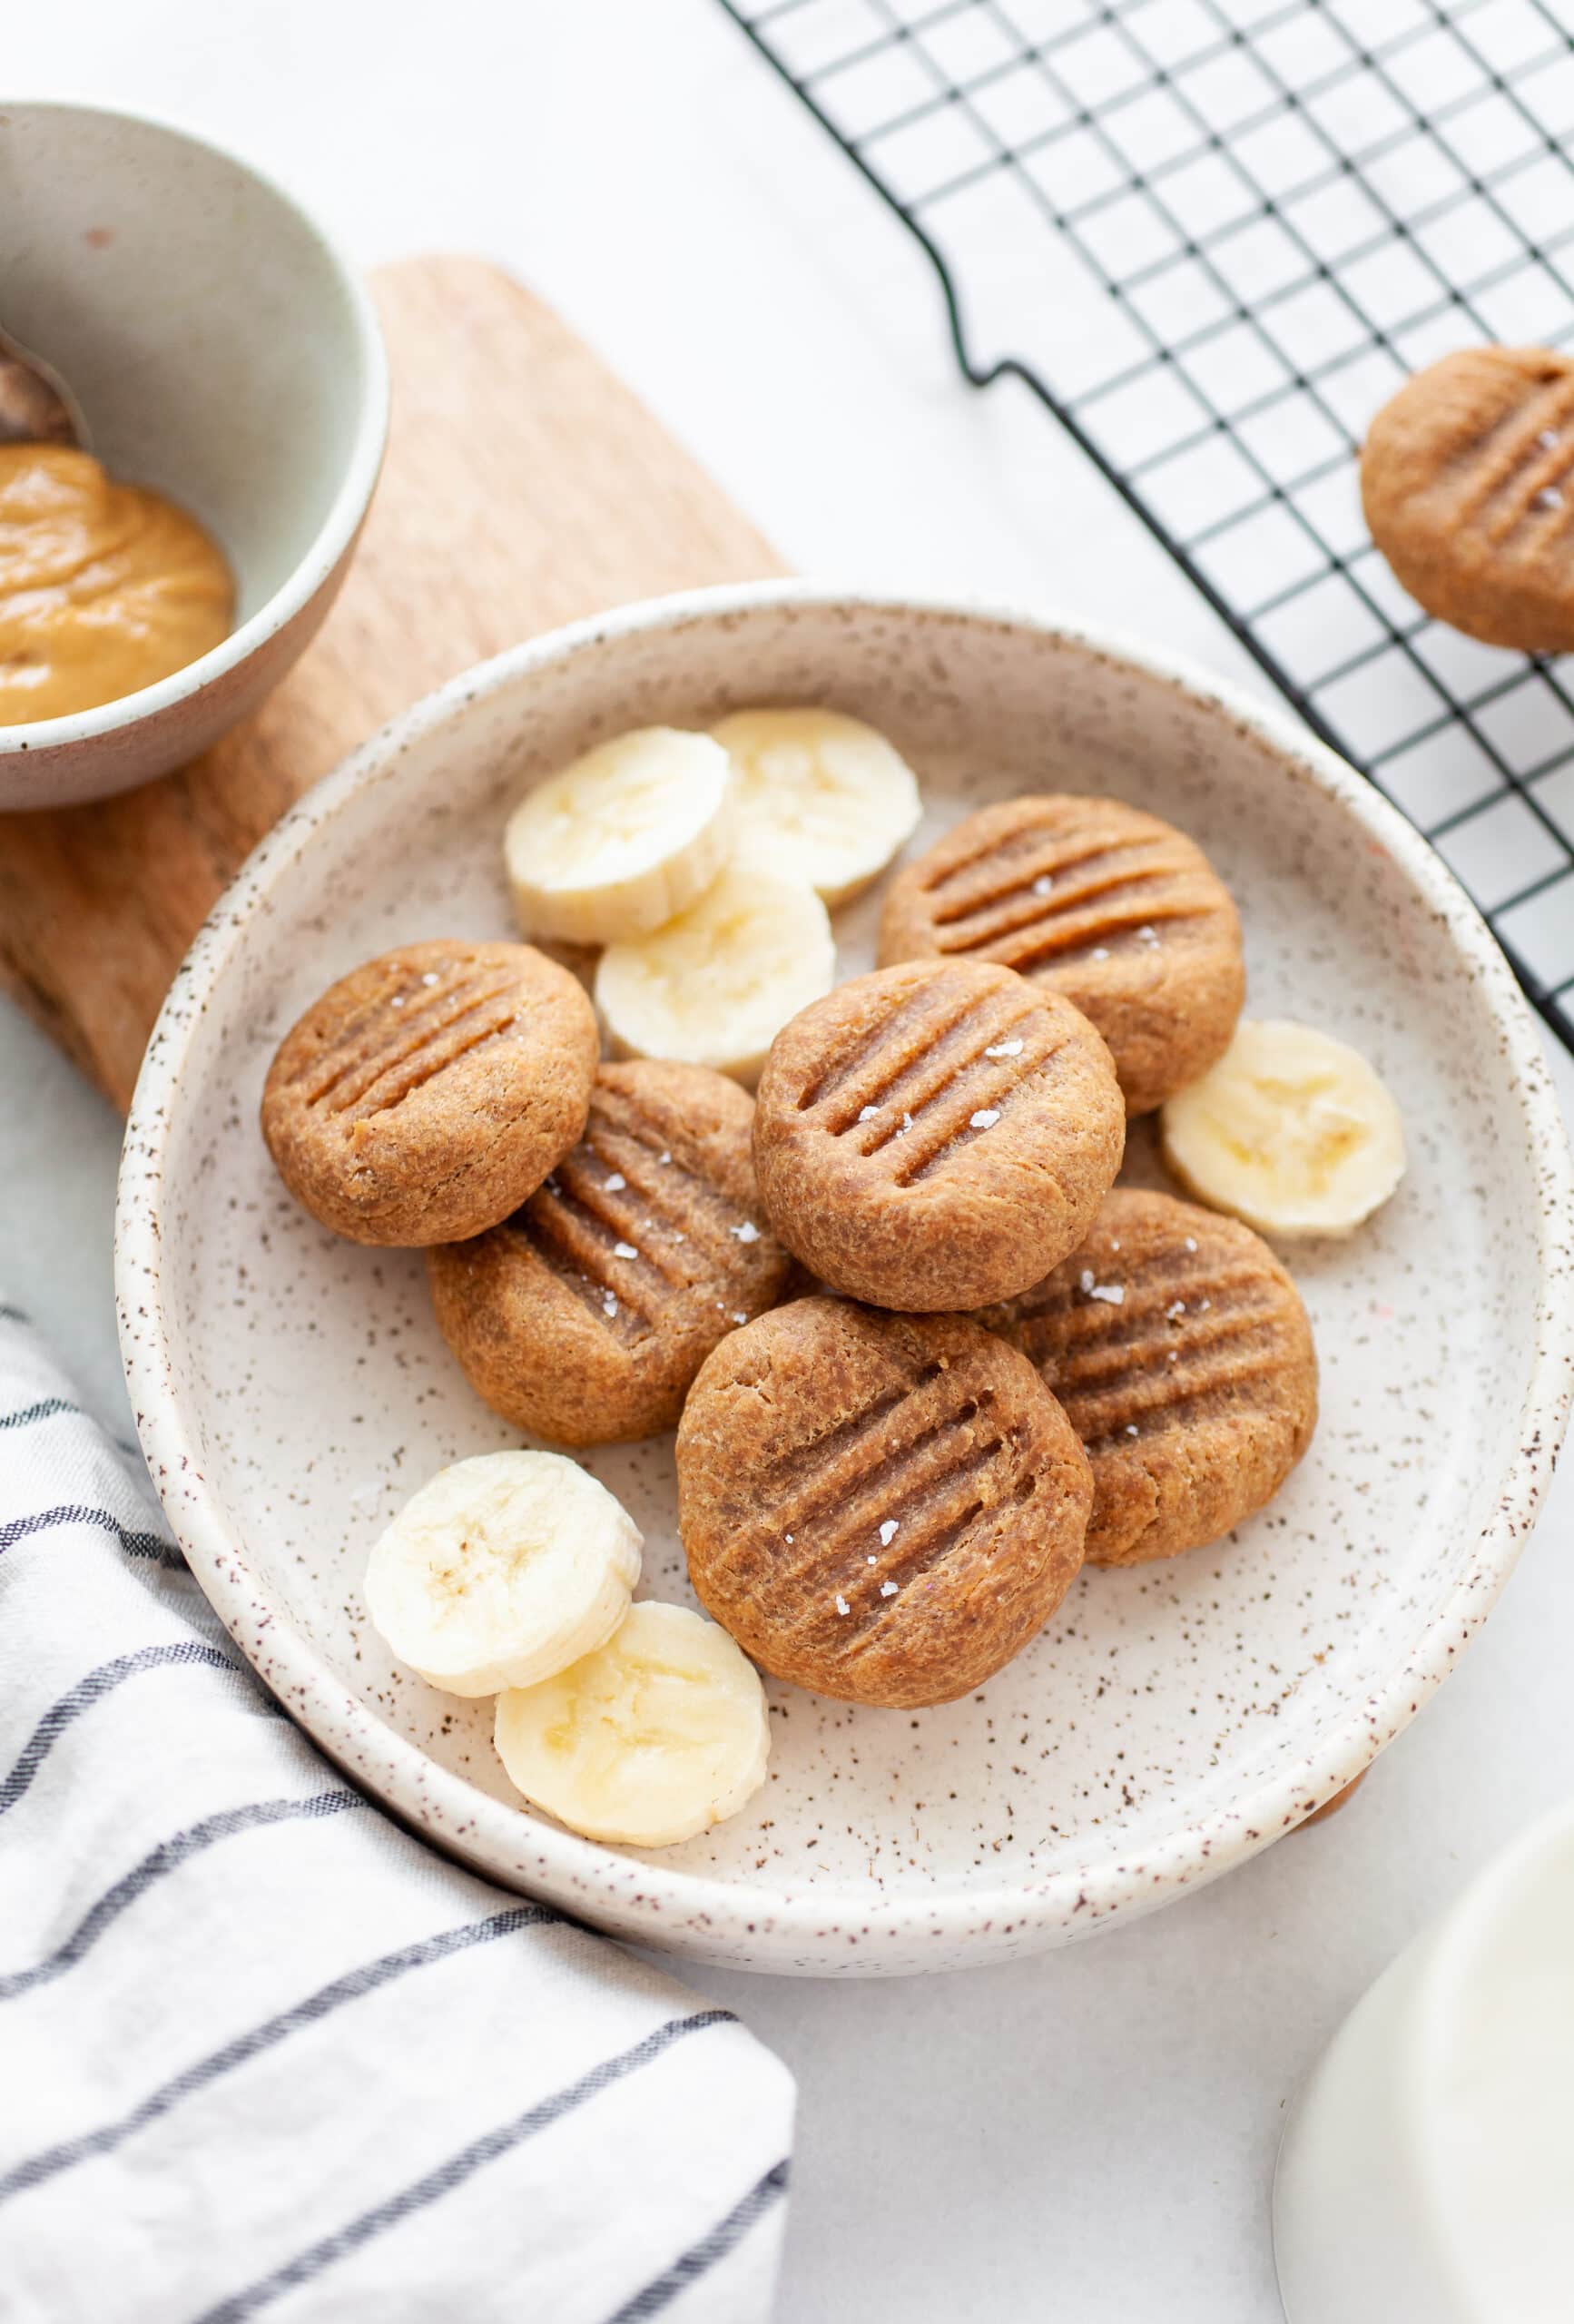 Healthy Peanut Butter Banana Cookies on a plate with banana slices